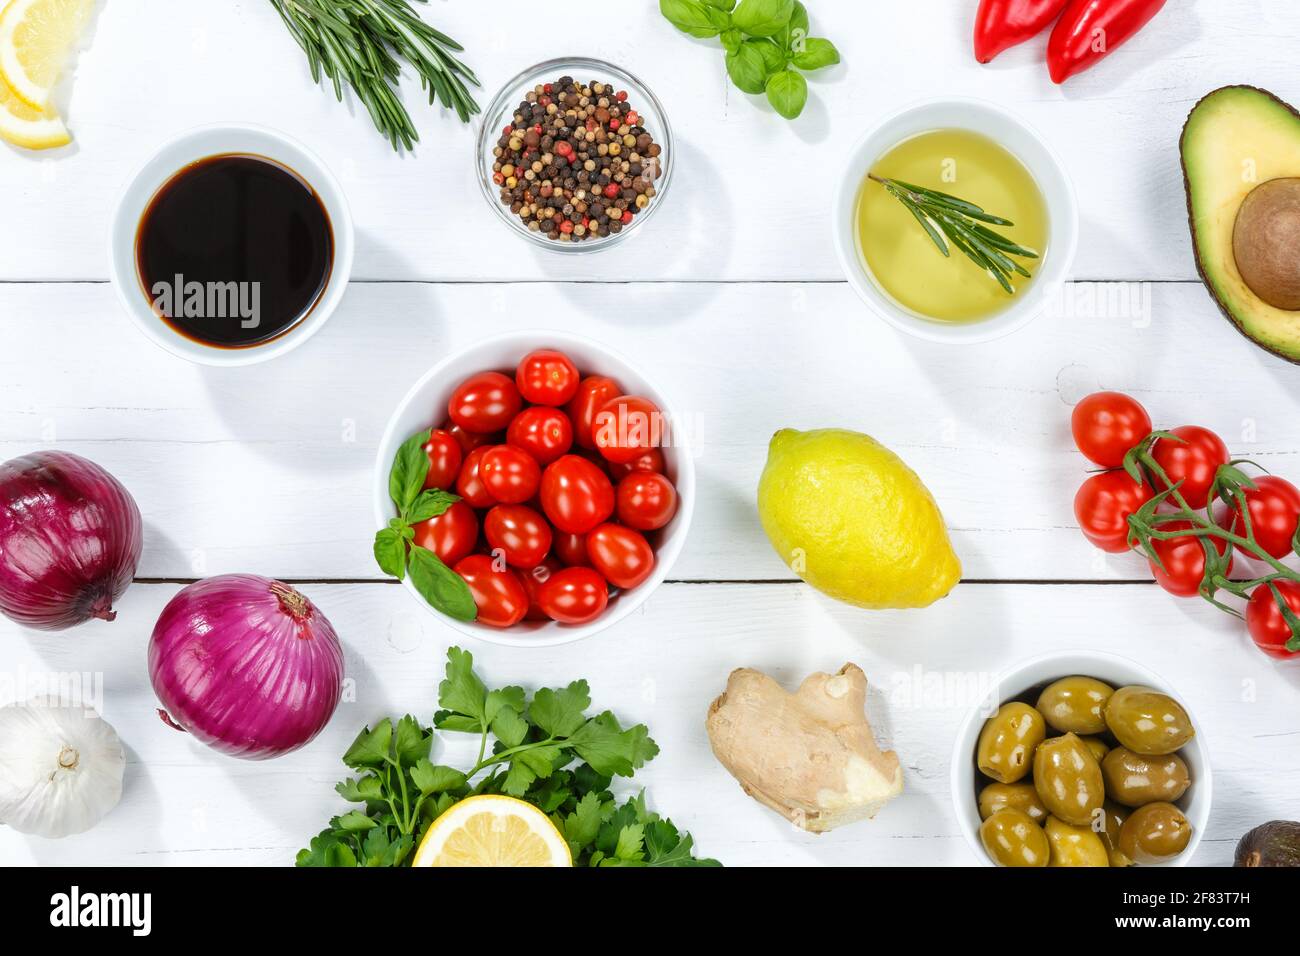 Healthy vegan food background clean eating vegetarian organic on a wooden board Stock Photo